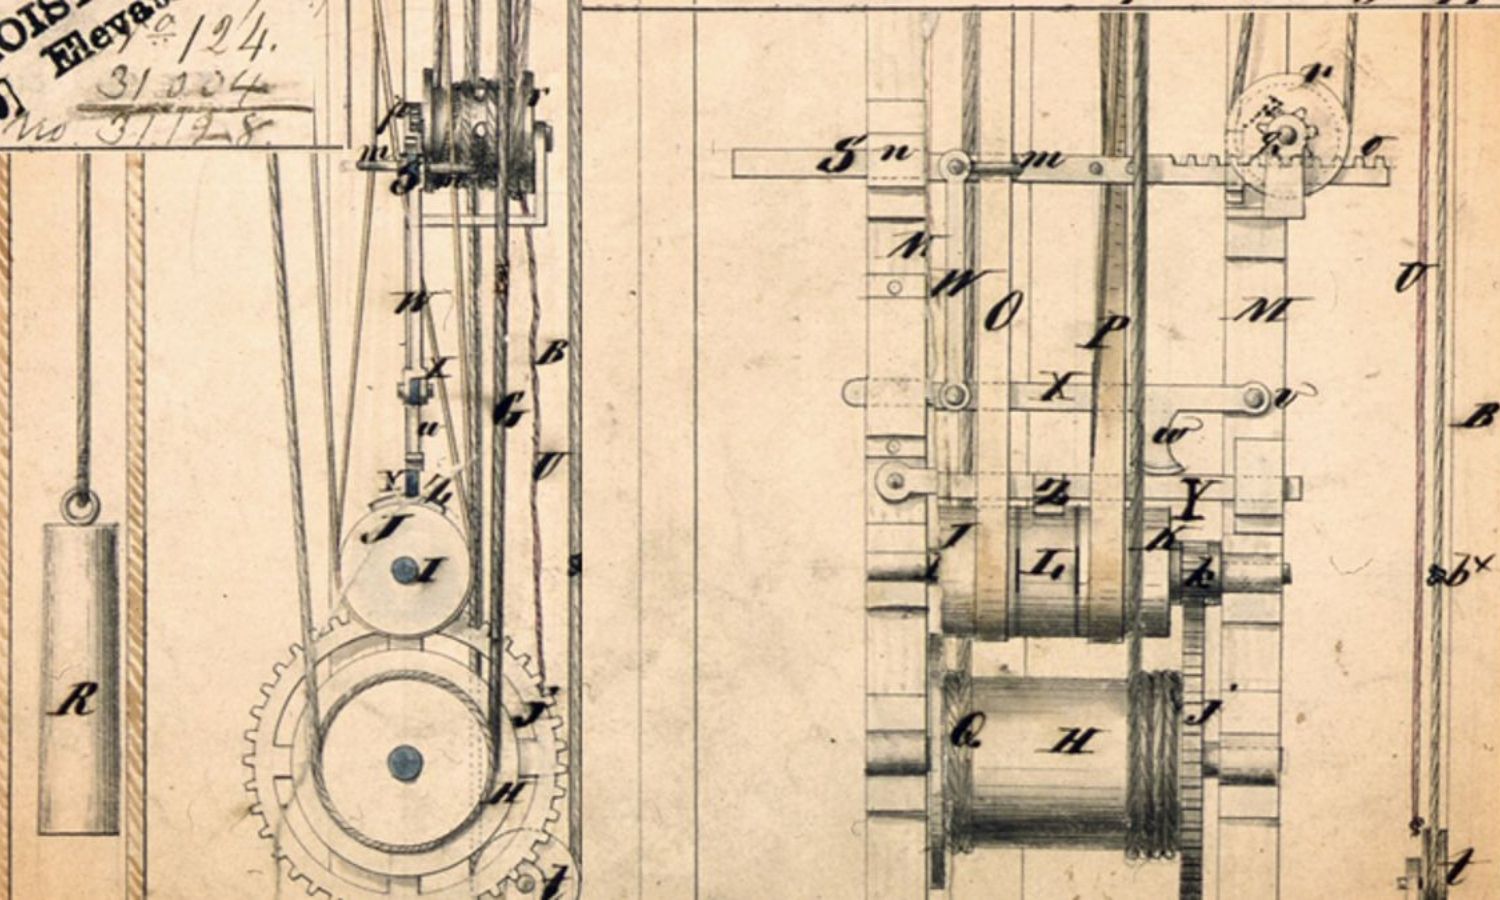 OTD in 1859: Inventor Otis Tufts patented the first elevator in the US.